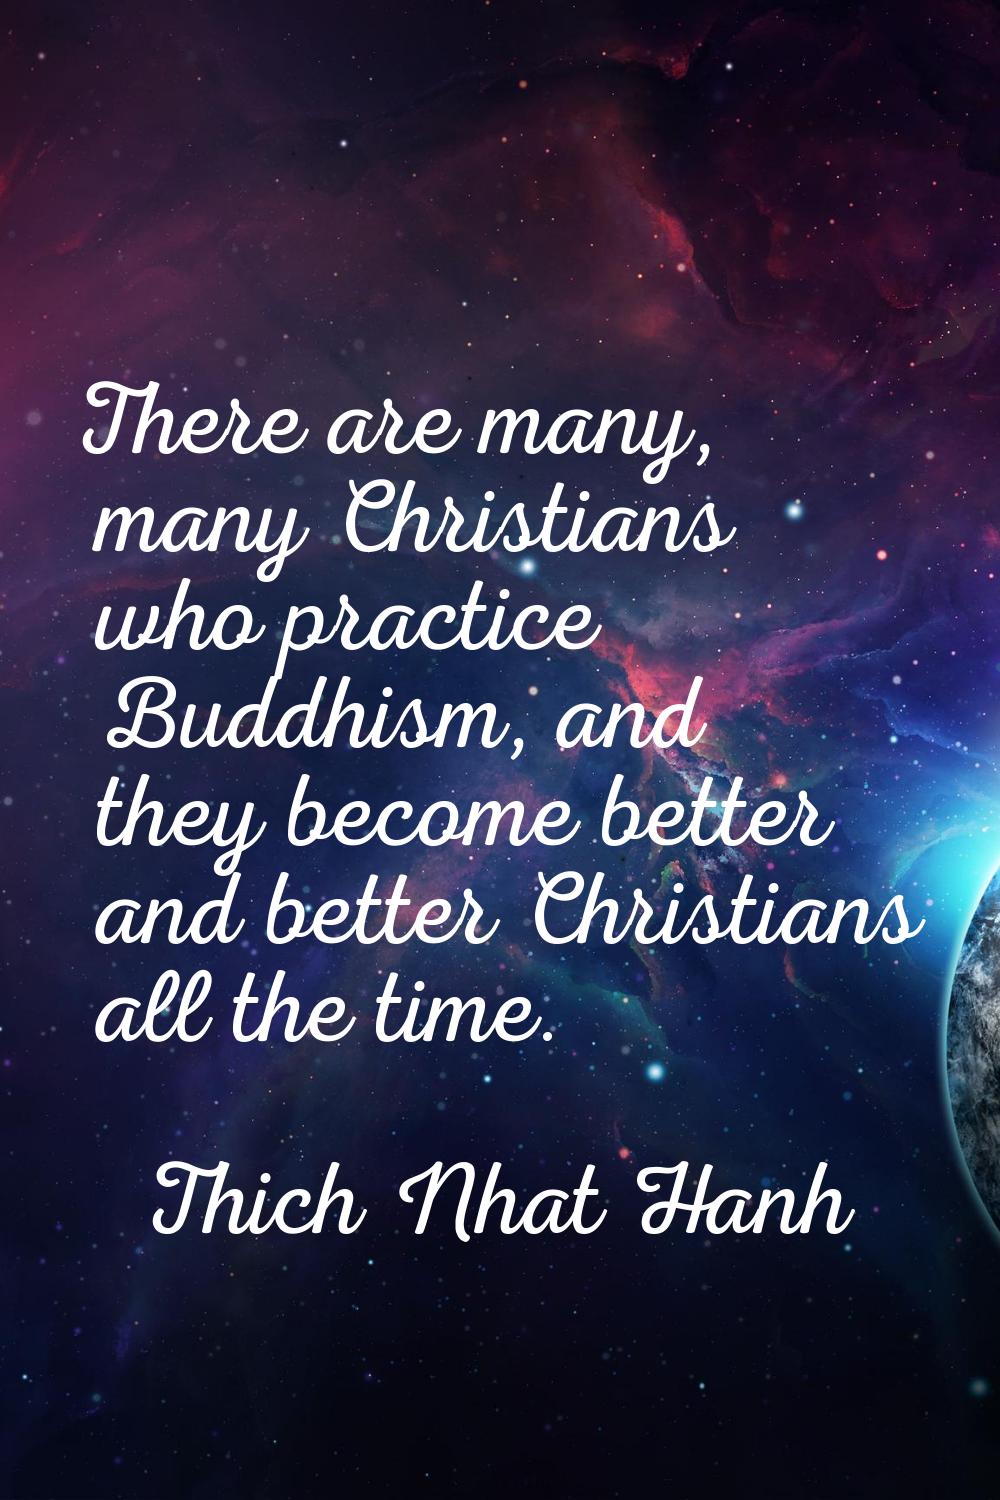 There are many, many Christians who practice Buddhism, and they become better and better Christians